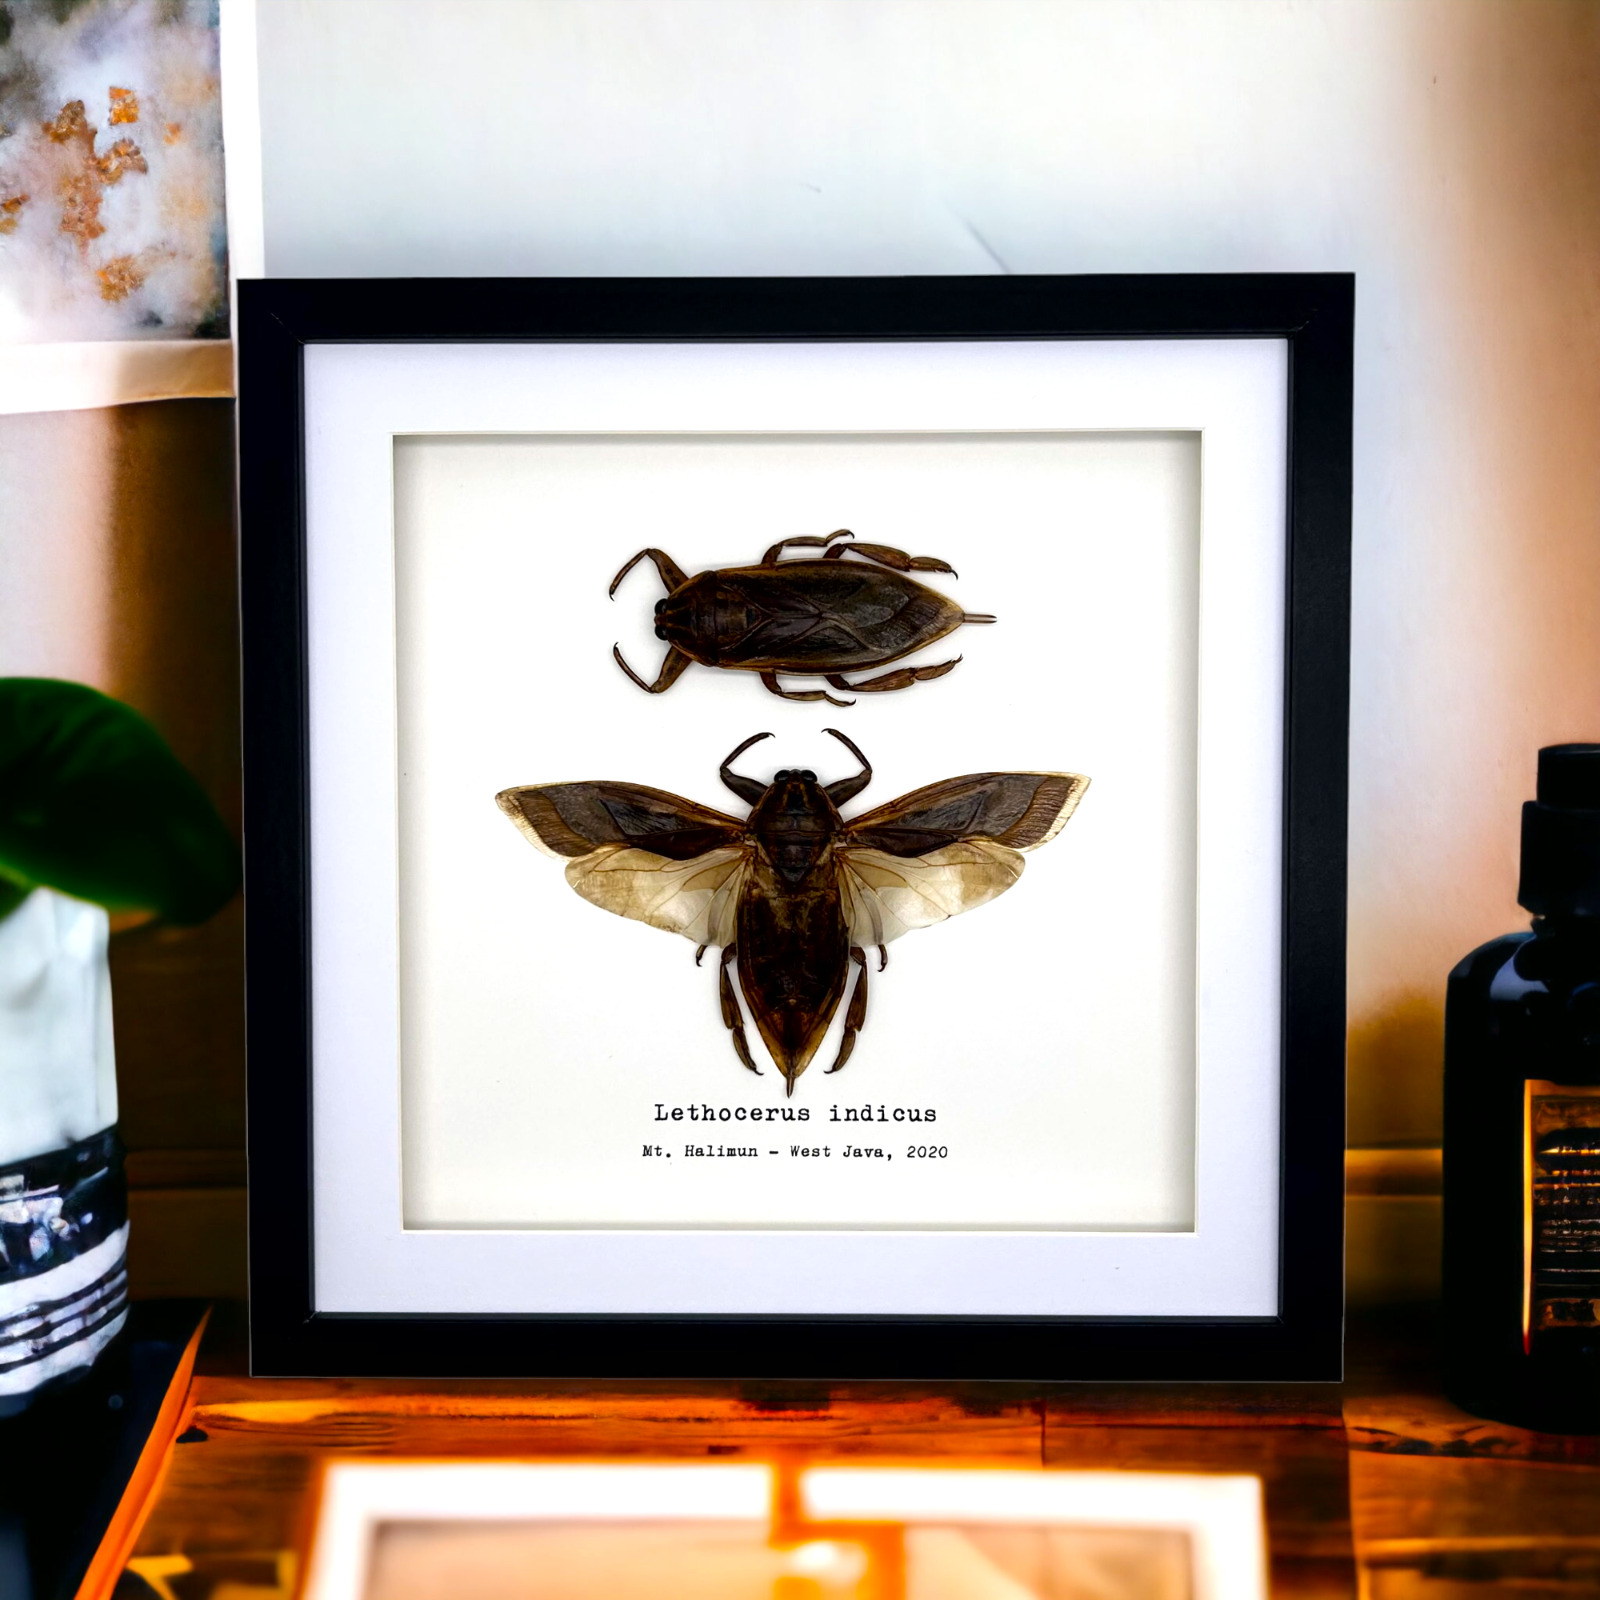 Giant Water Bug (Lethocerus indicus) Shadow Box Frame, Professionally Mounted